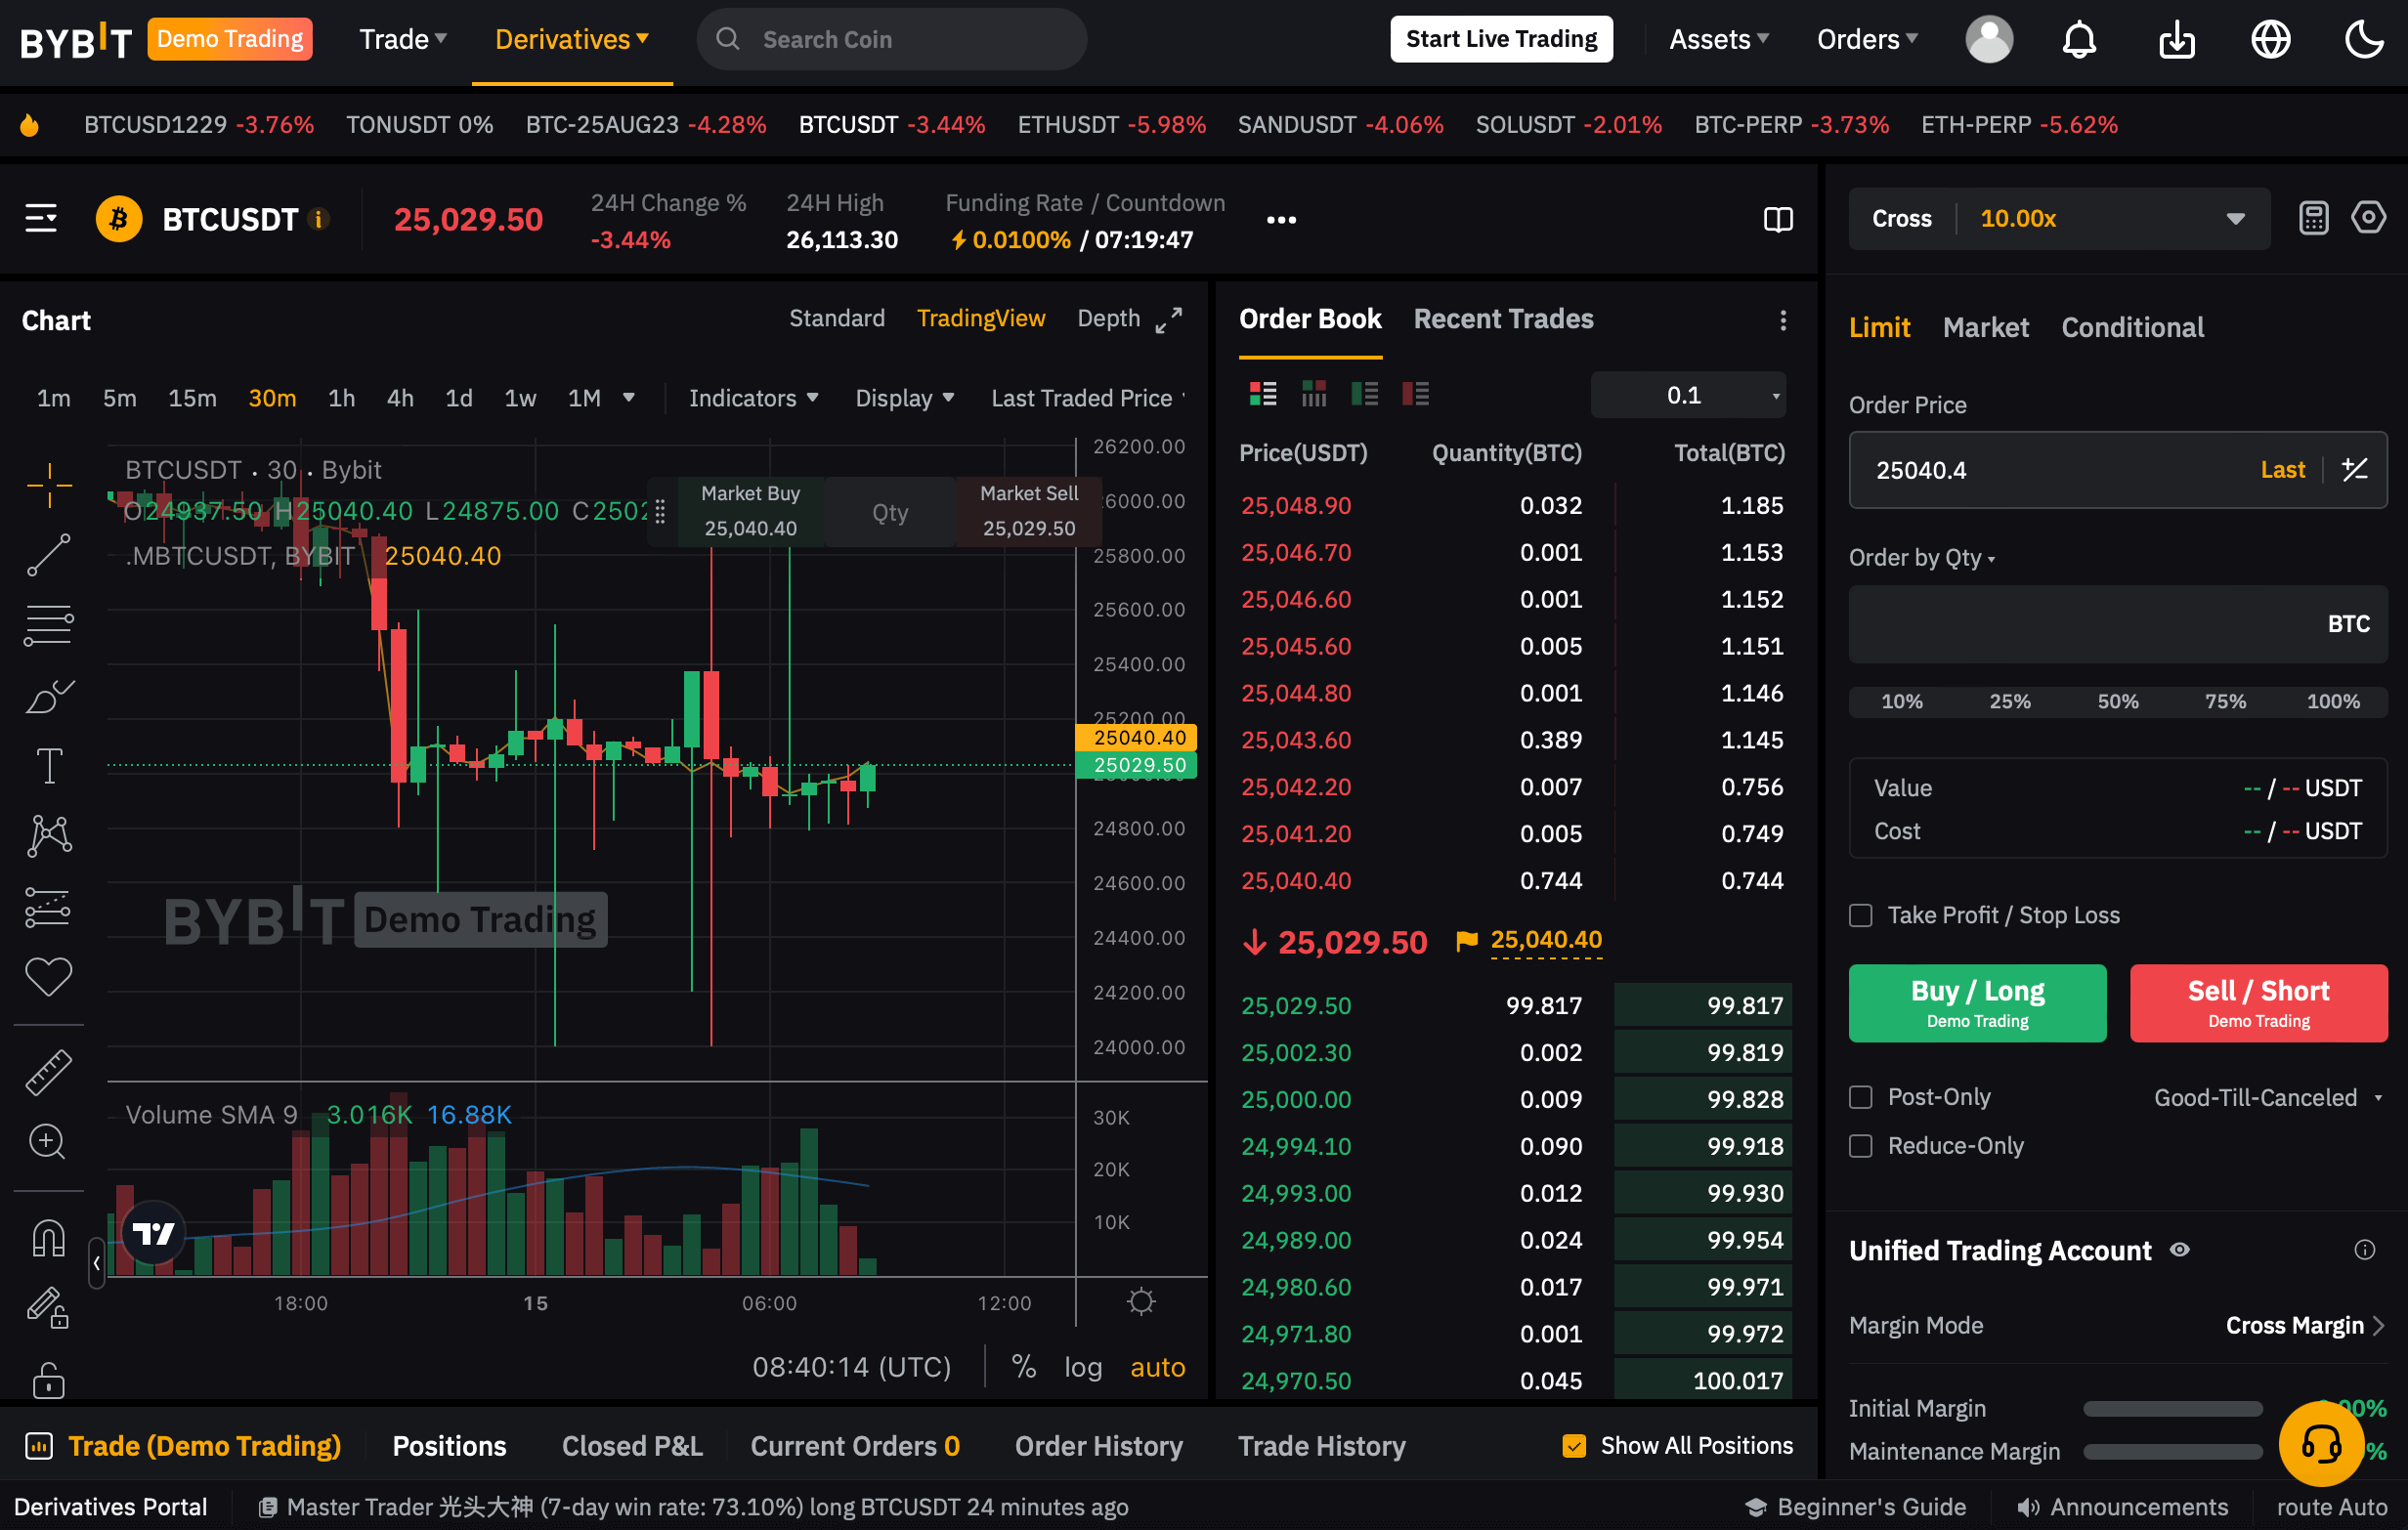 Bybit Demo Trading page.